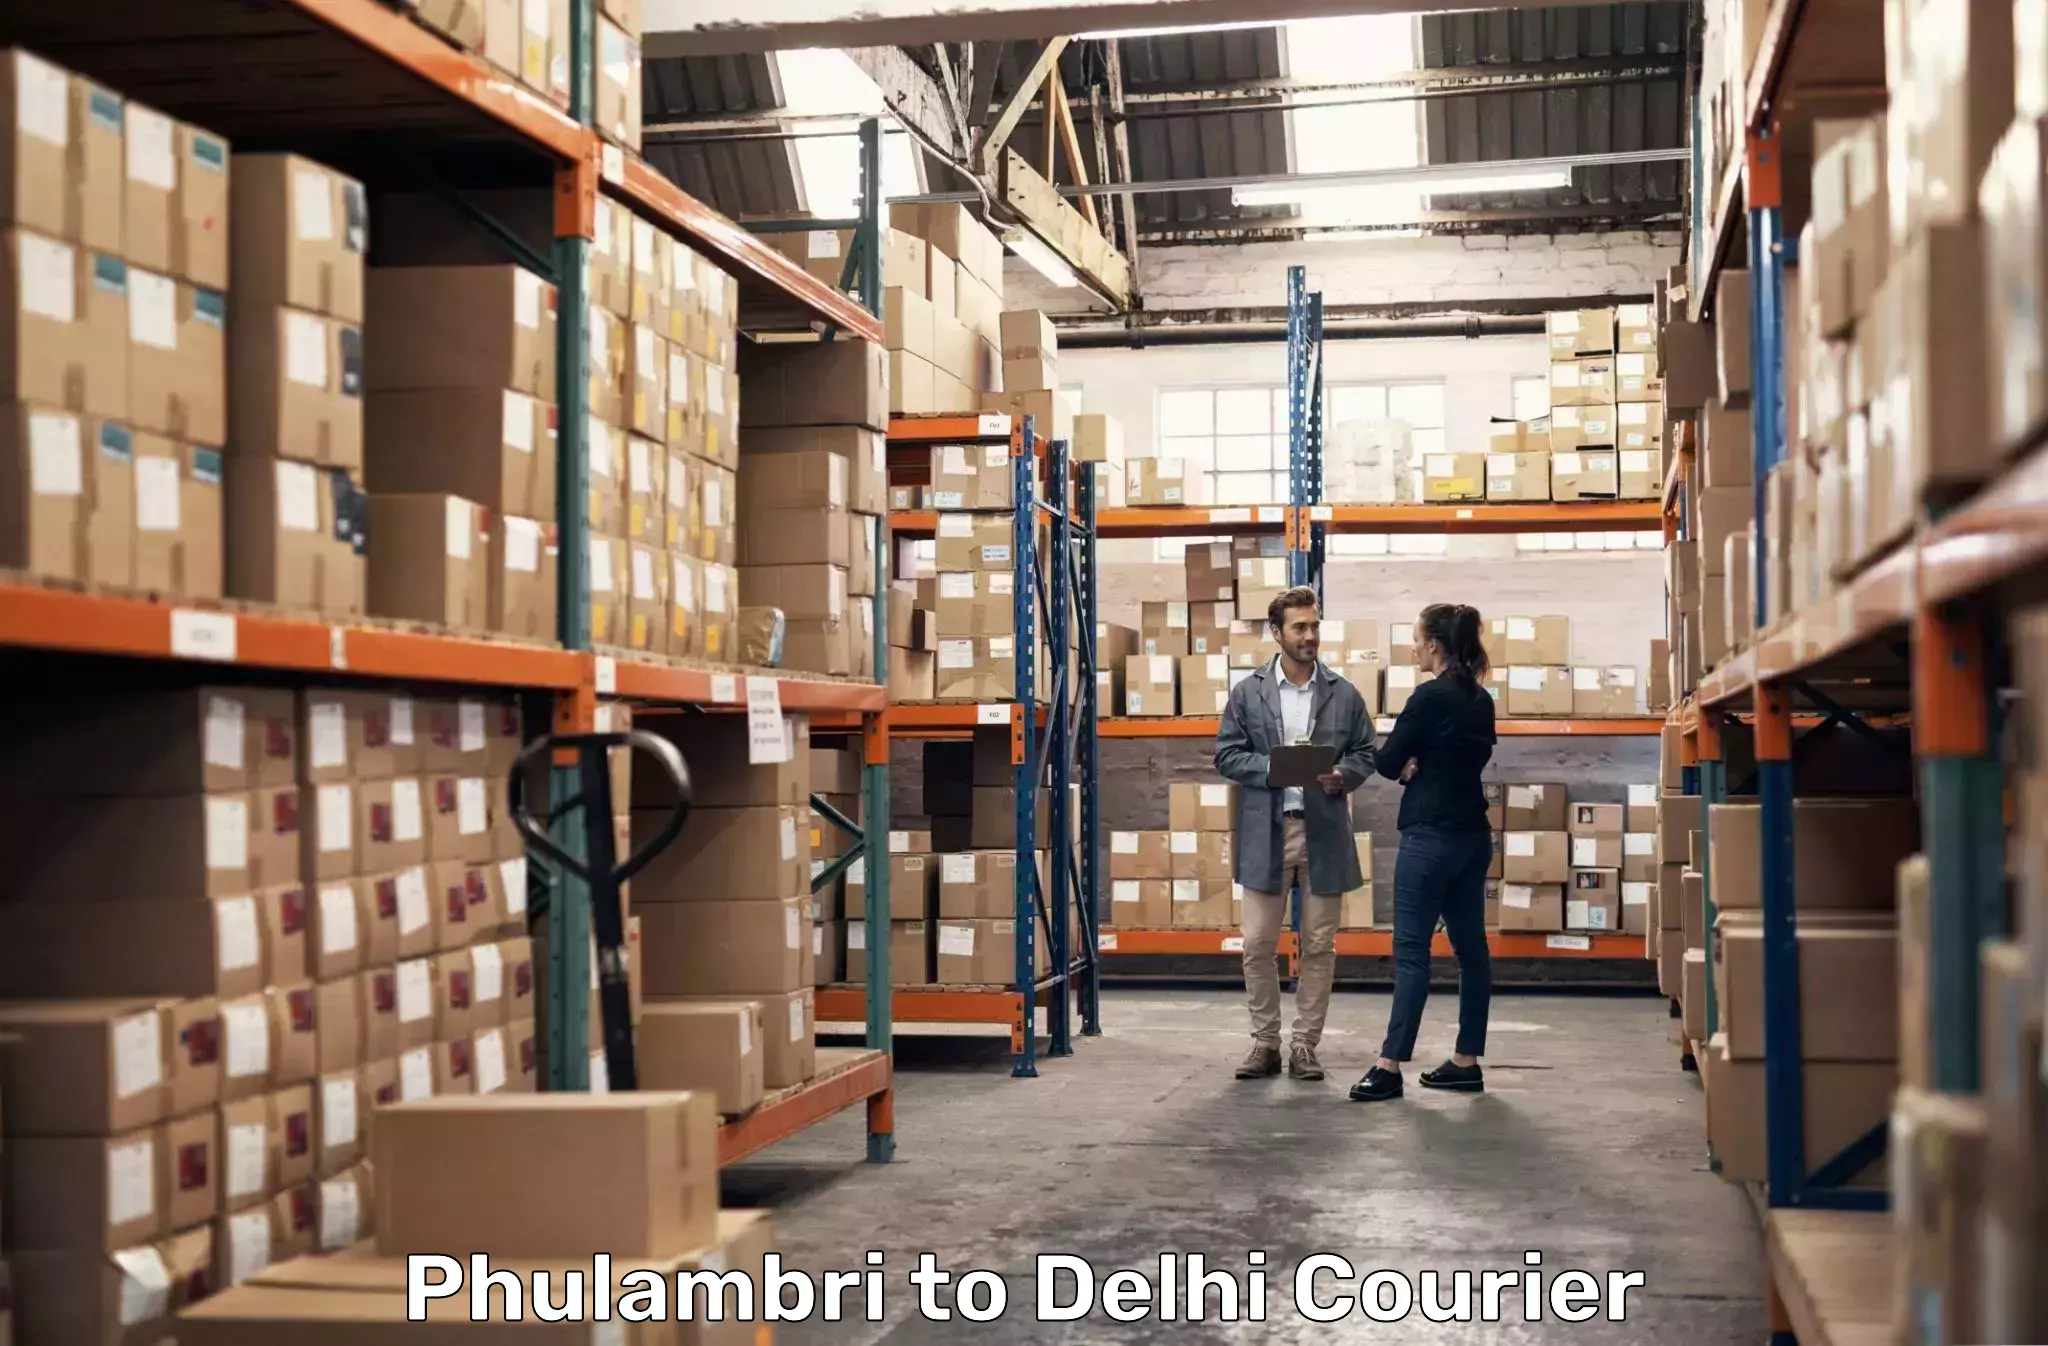 International courier networks Phulambri to NCR